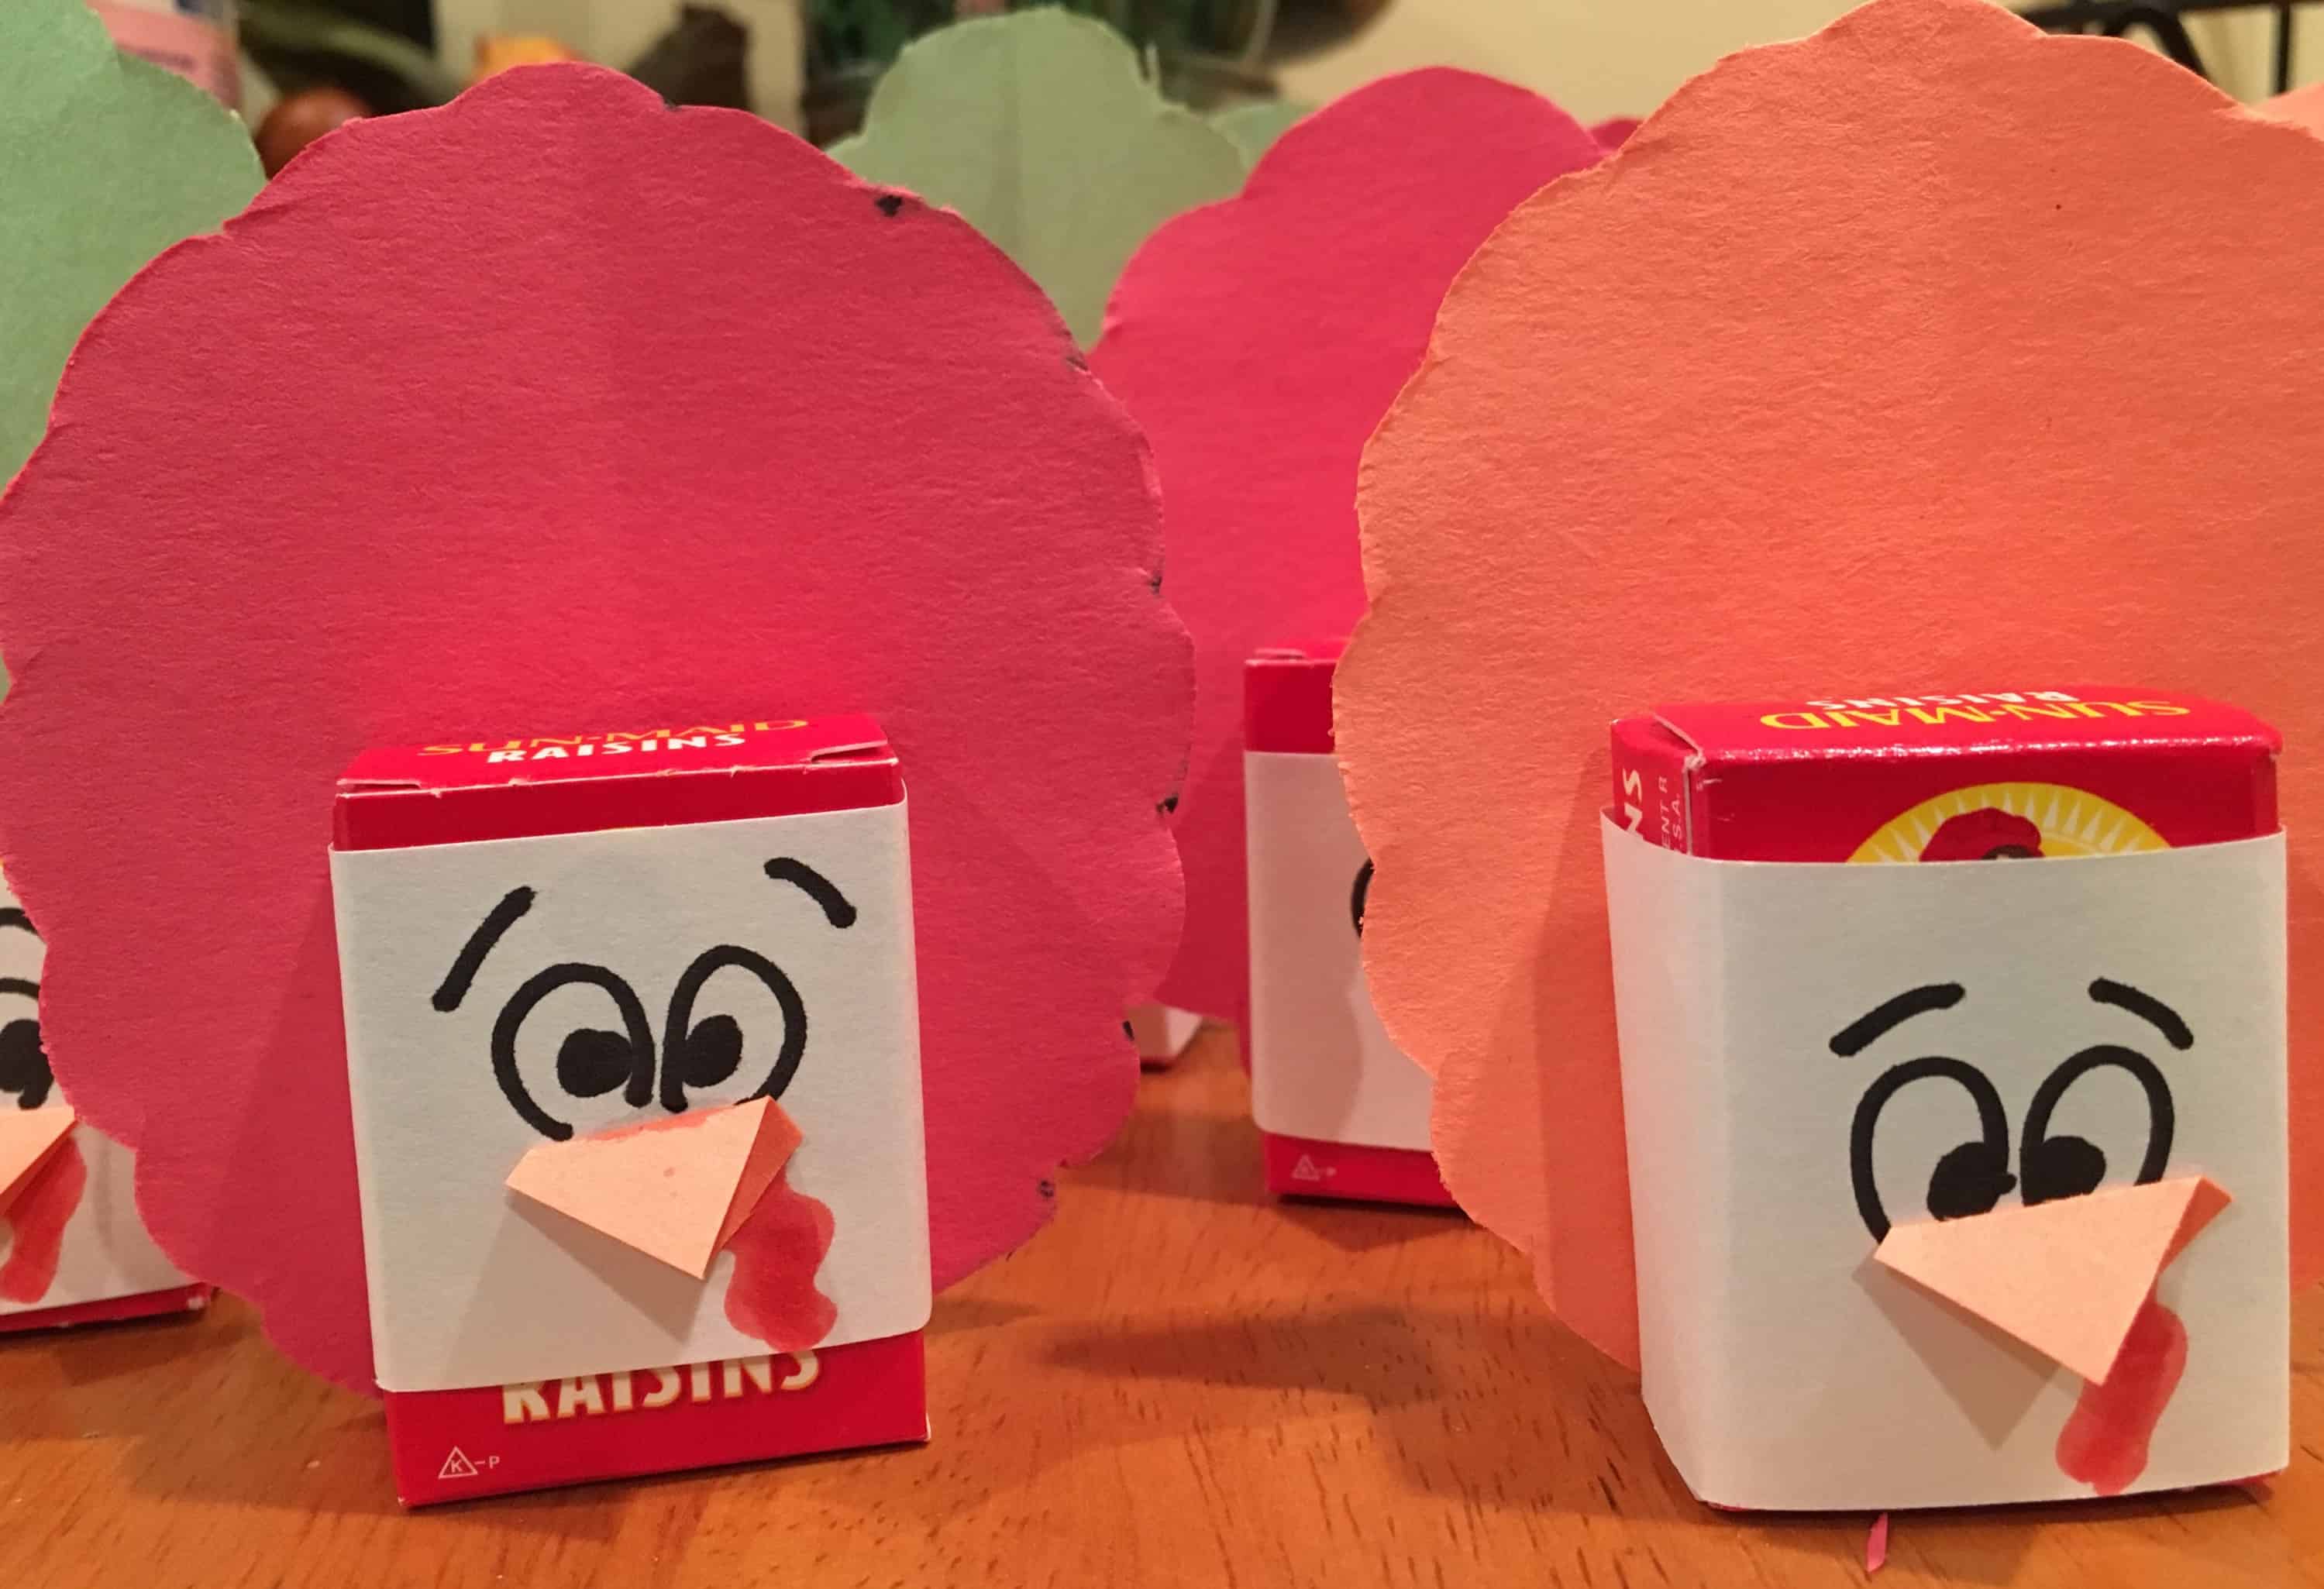 By wrapping raisin boxes in construction paper, you can make cute and healthy Thanksgiving turkeys! Perfect for school parties.